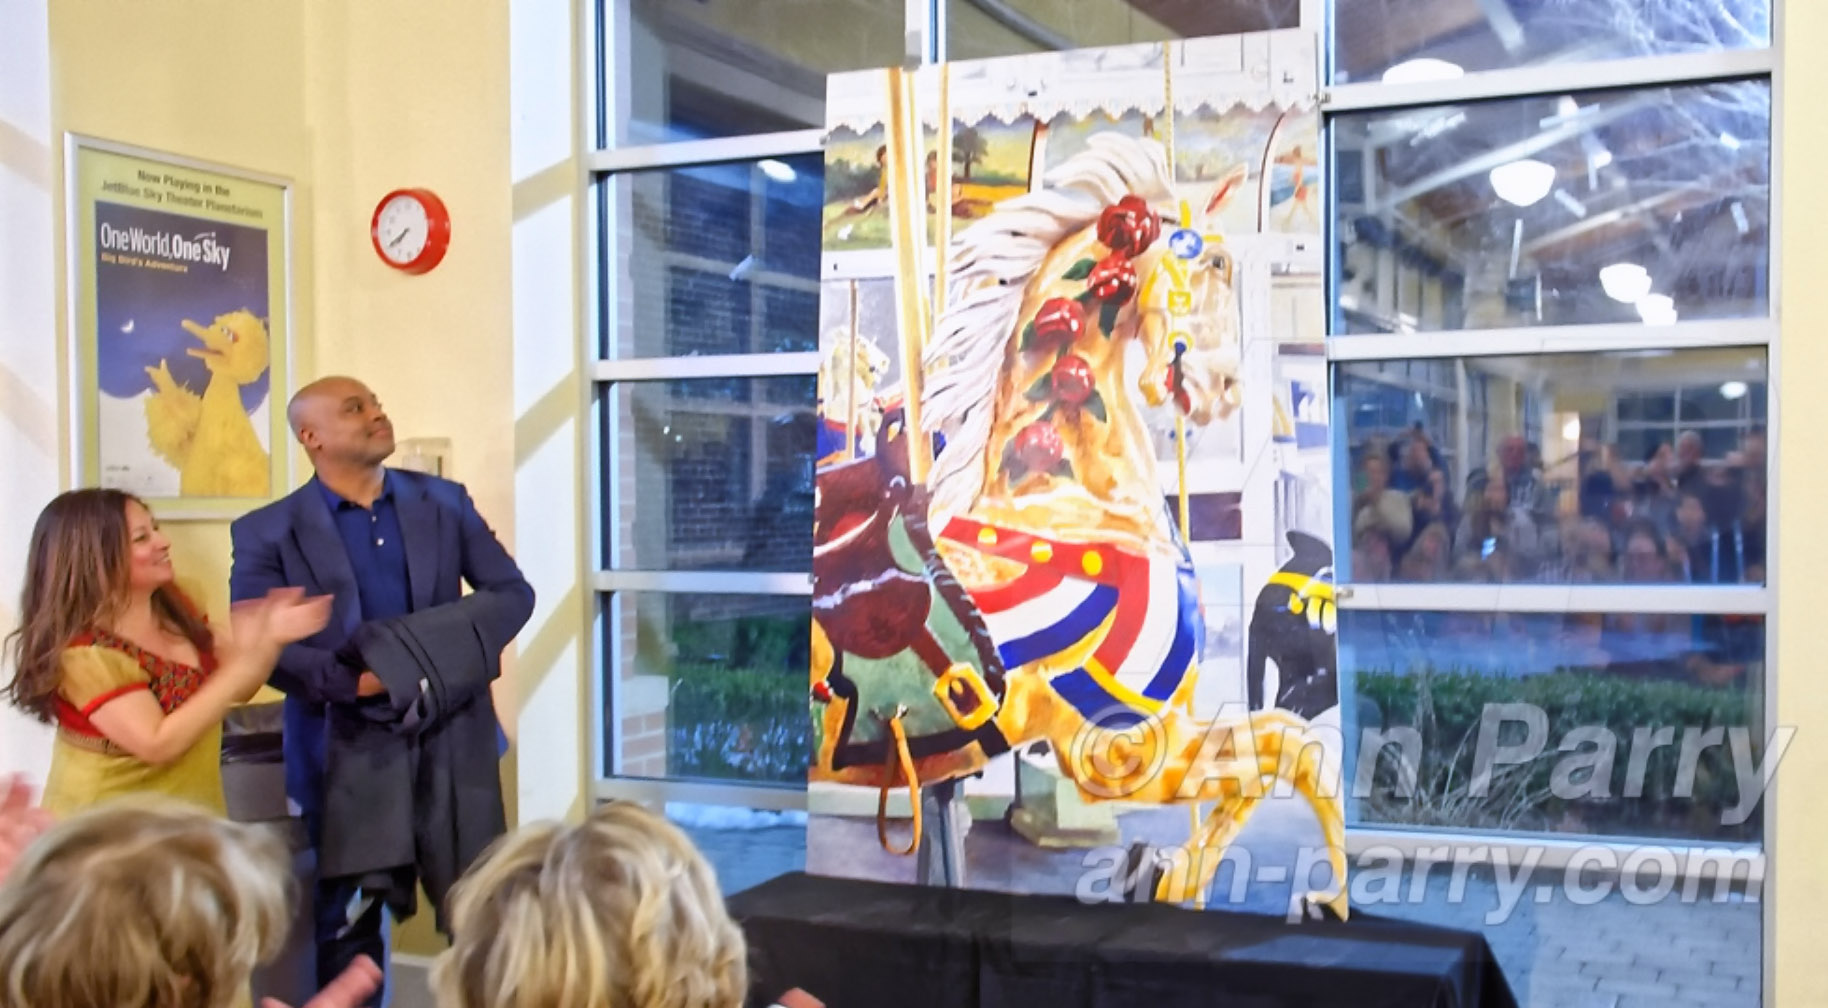 Cayla Kempf rides Nunley's Carousel during Mural Unveiling Celebration, March 9, 2019, in Garden City, Long Island, New York